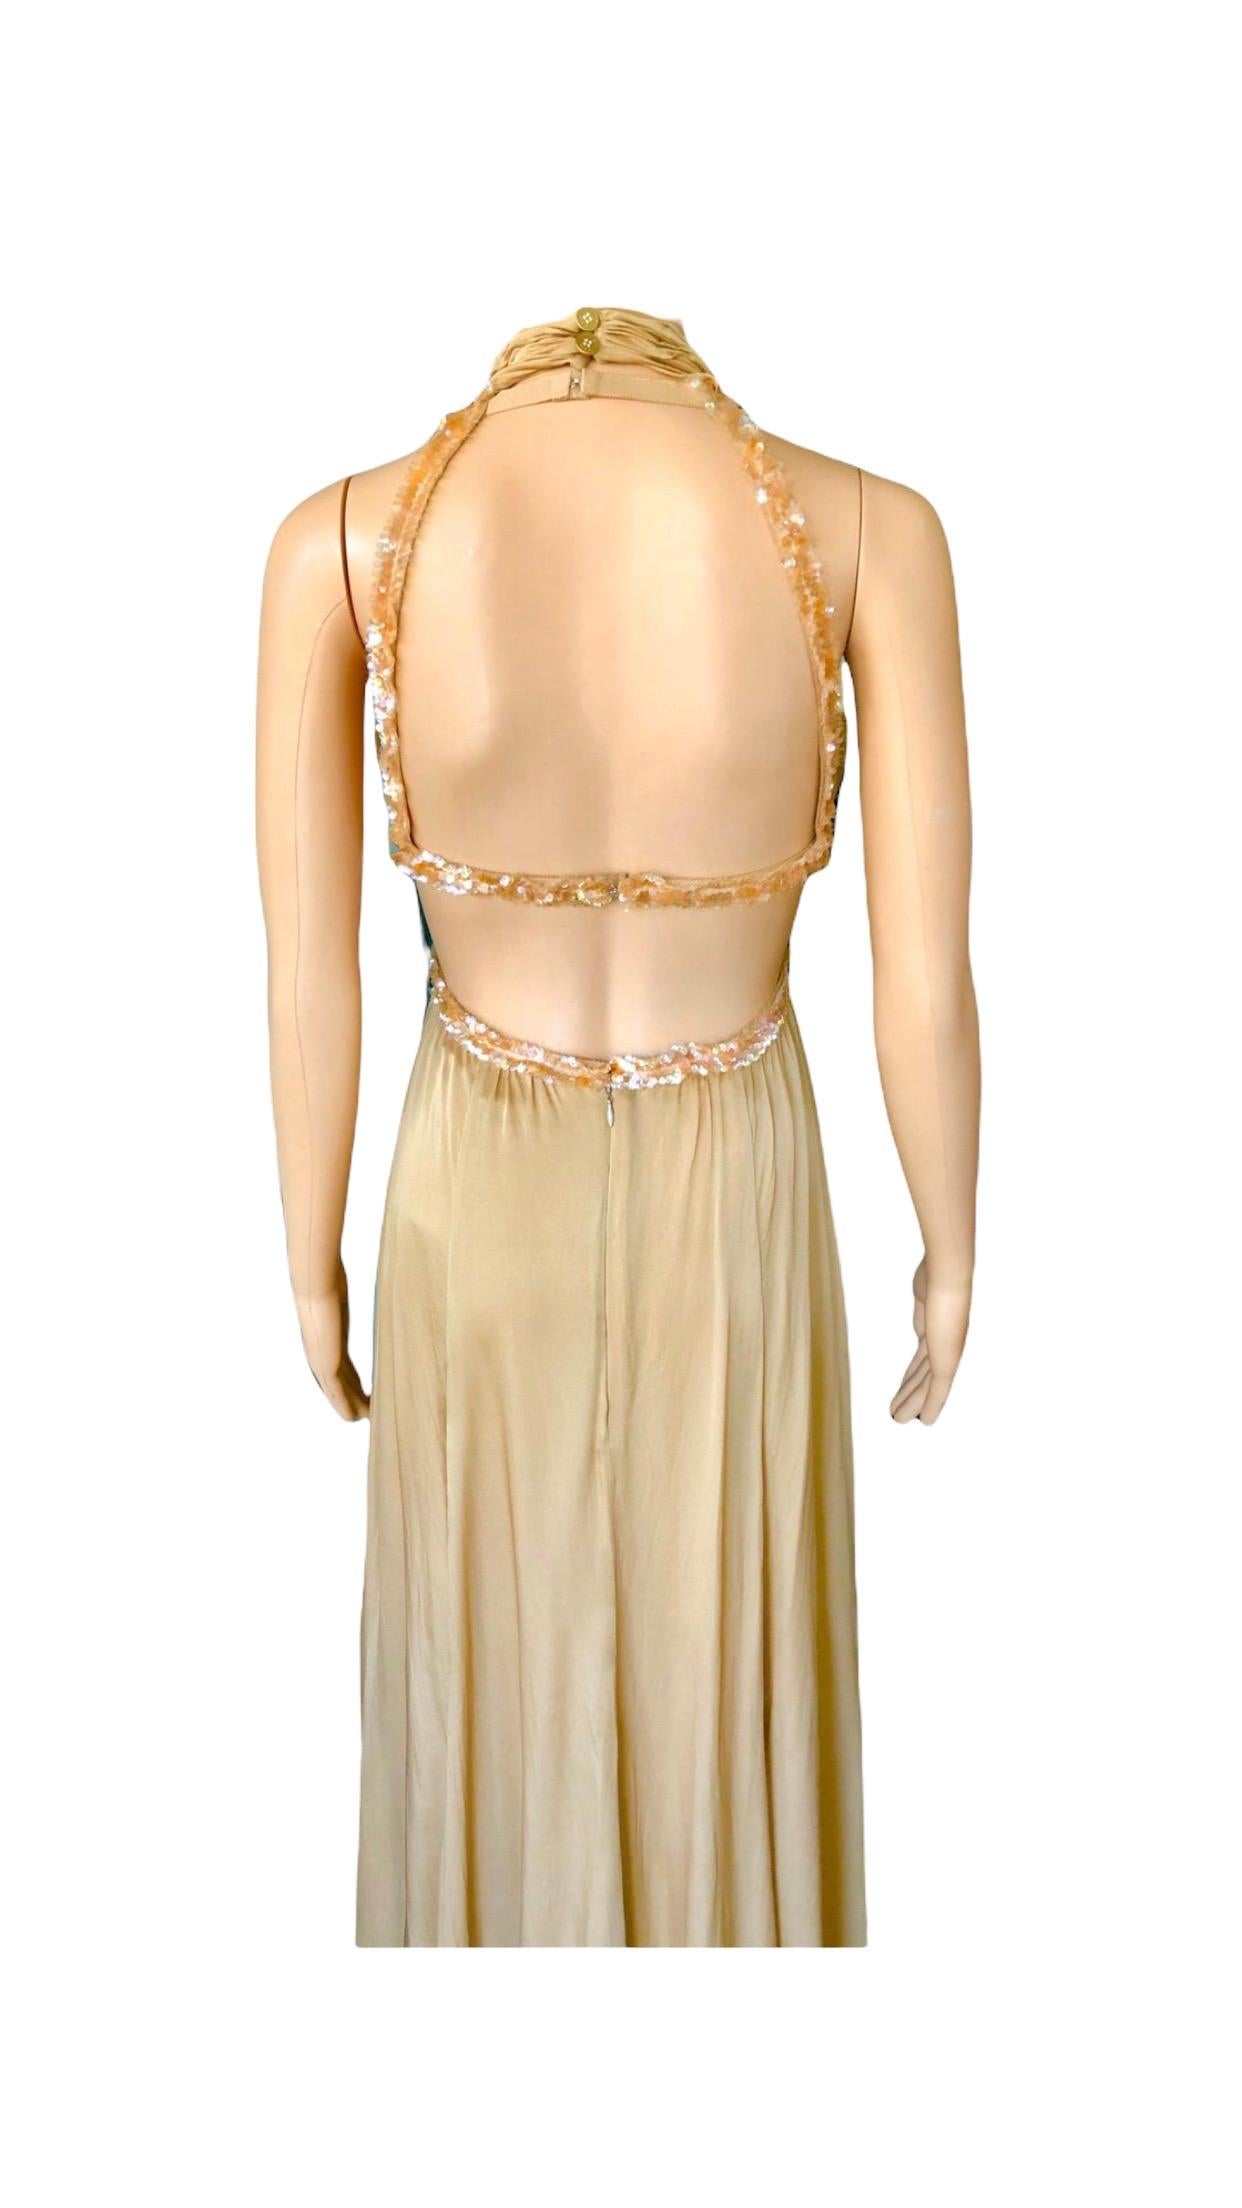 Chanel S/S 2003 Embellished Cut-Out Plunging Open Back Evening Dress Gown For Sale 9